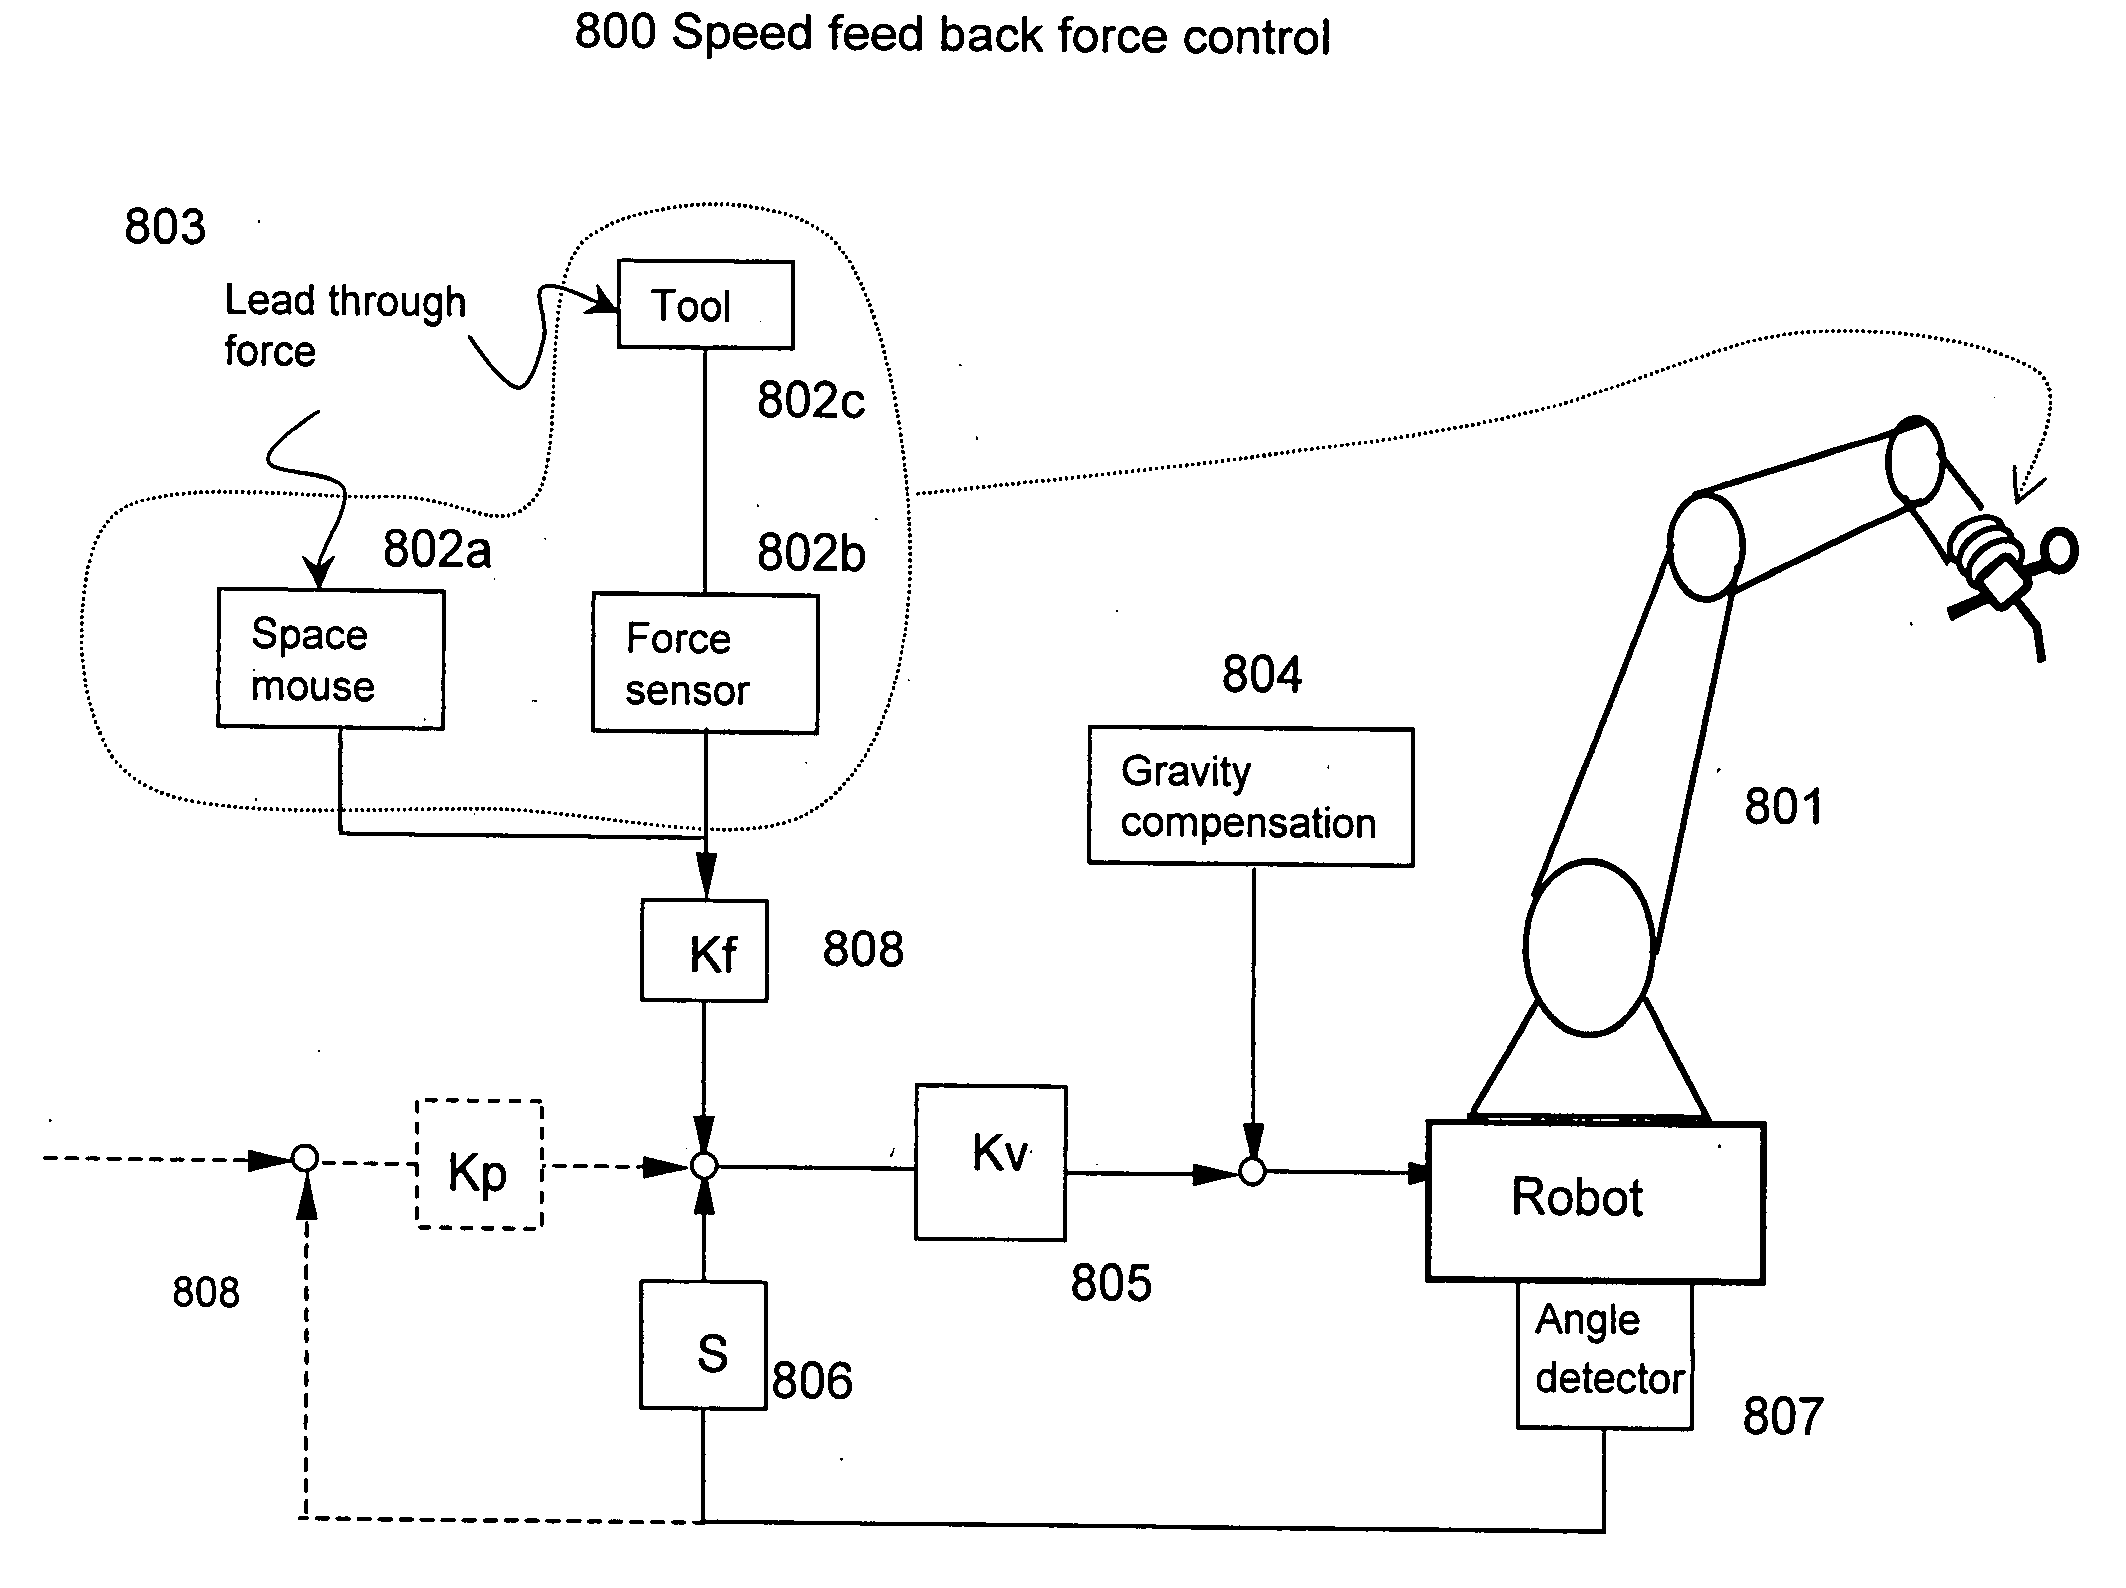 Accelerometer to monitor movement of a tool assembly attached to a robot end effector